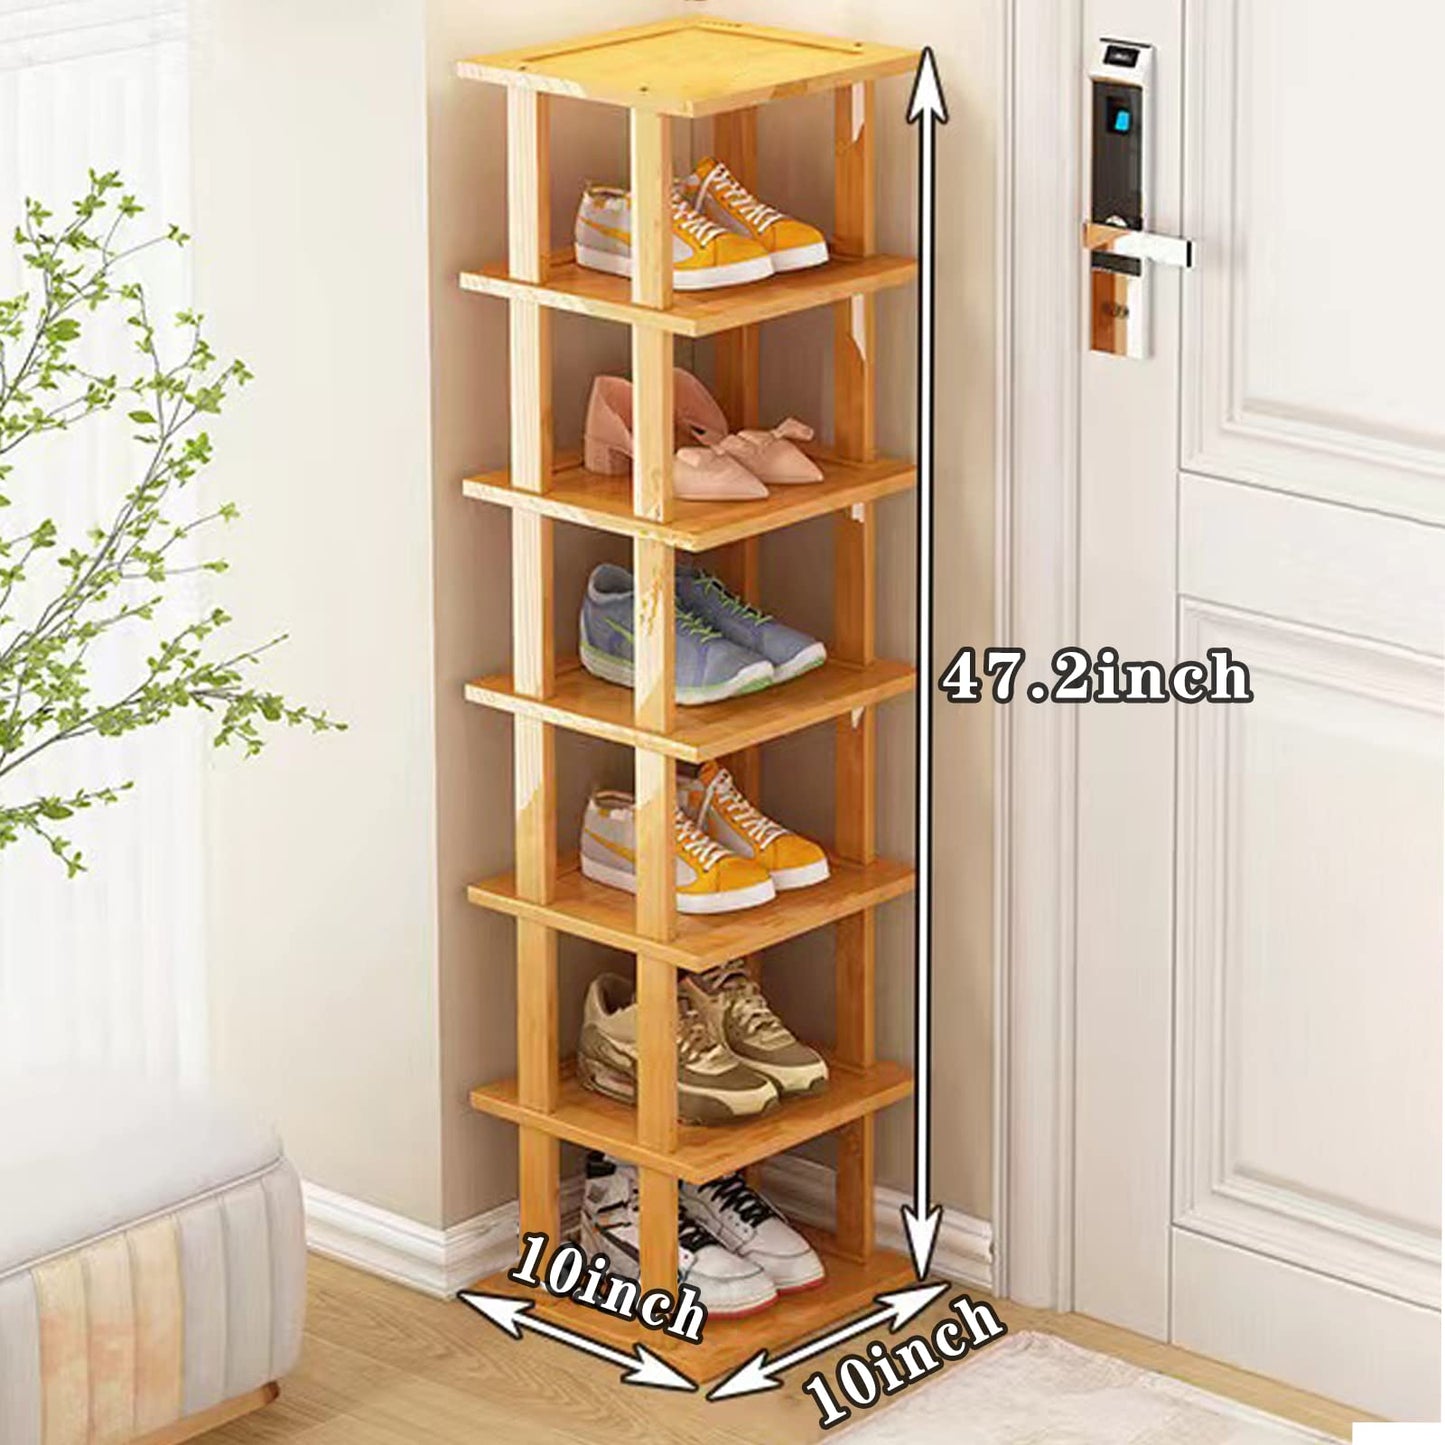 Bamboo Shoe Rack - Vertical Shoe Rack for Small Spaces, Tall Narrow Shoe Rack Organizer for Closet Entryway Corner Garage and Bedroom,Skinny Shoe Shelf Free Stackable DIY - Space Saving Storage